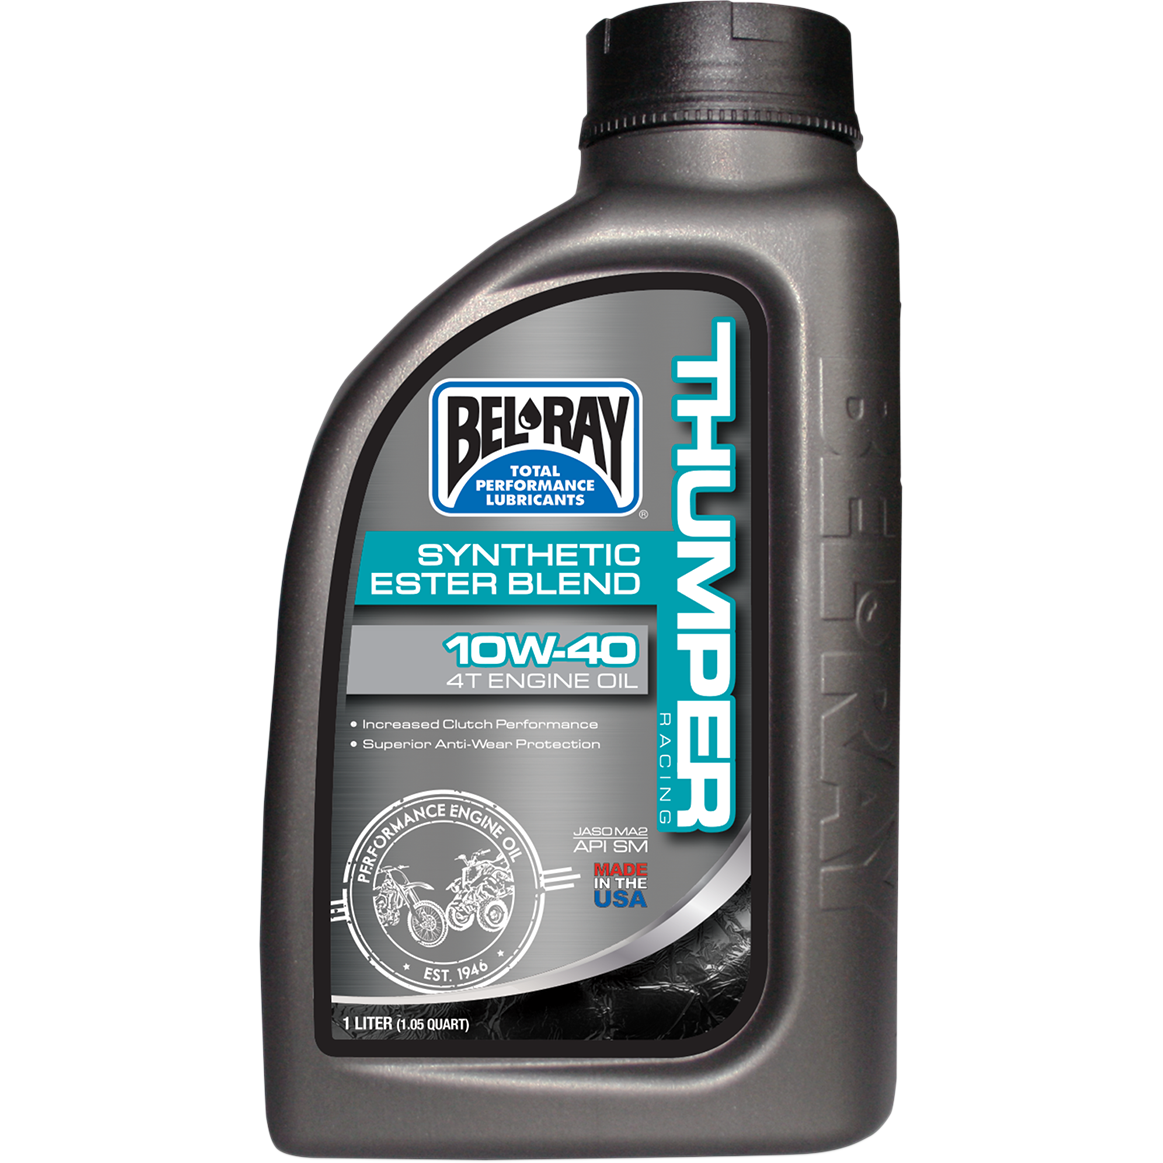 PJ1 Pro Contact Cleaner - PJ1 Powersports